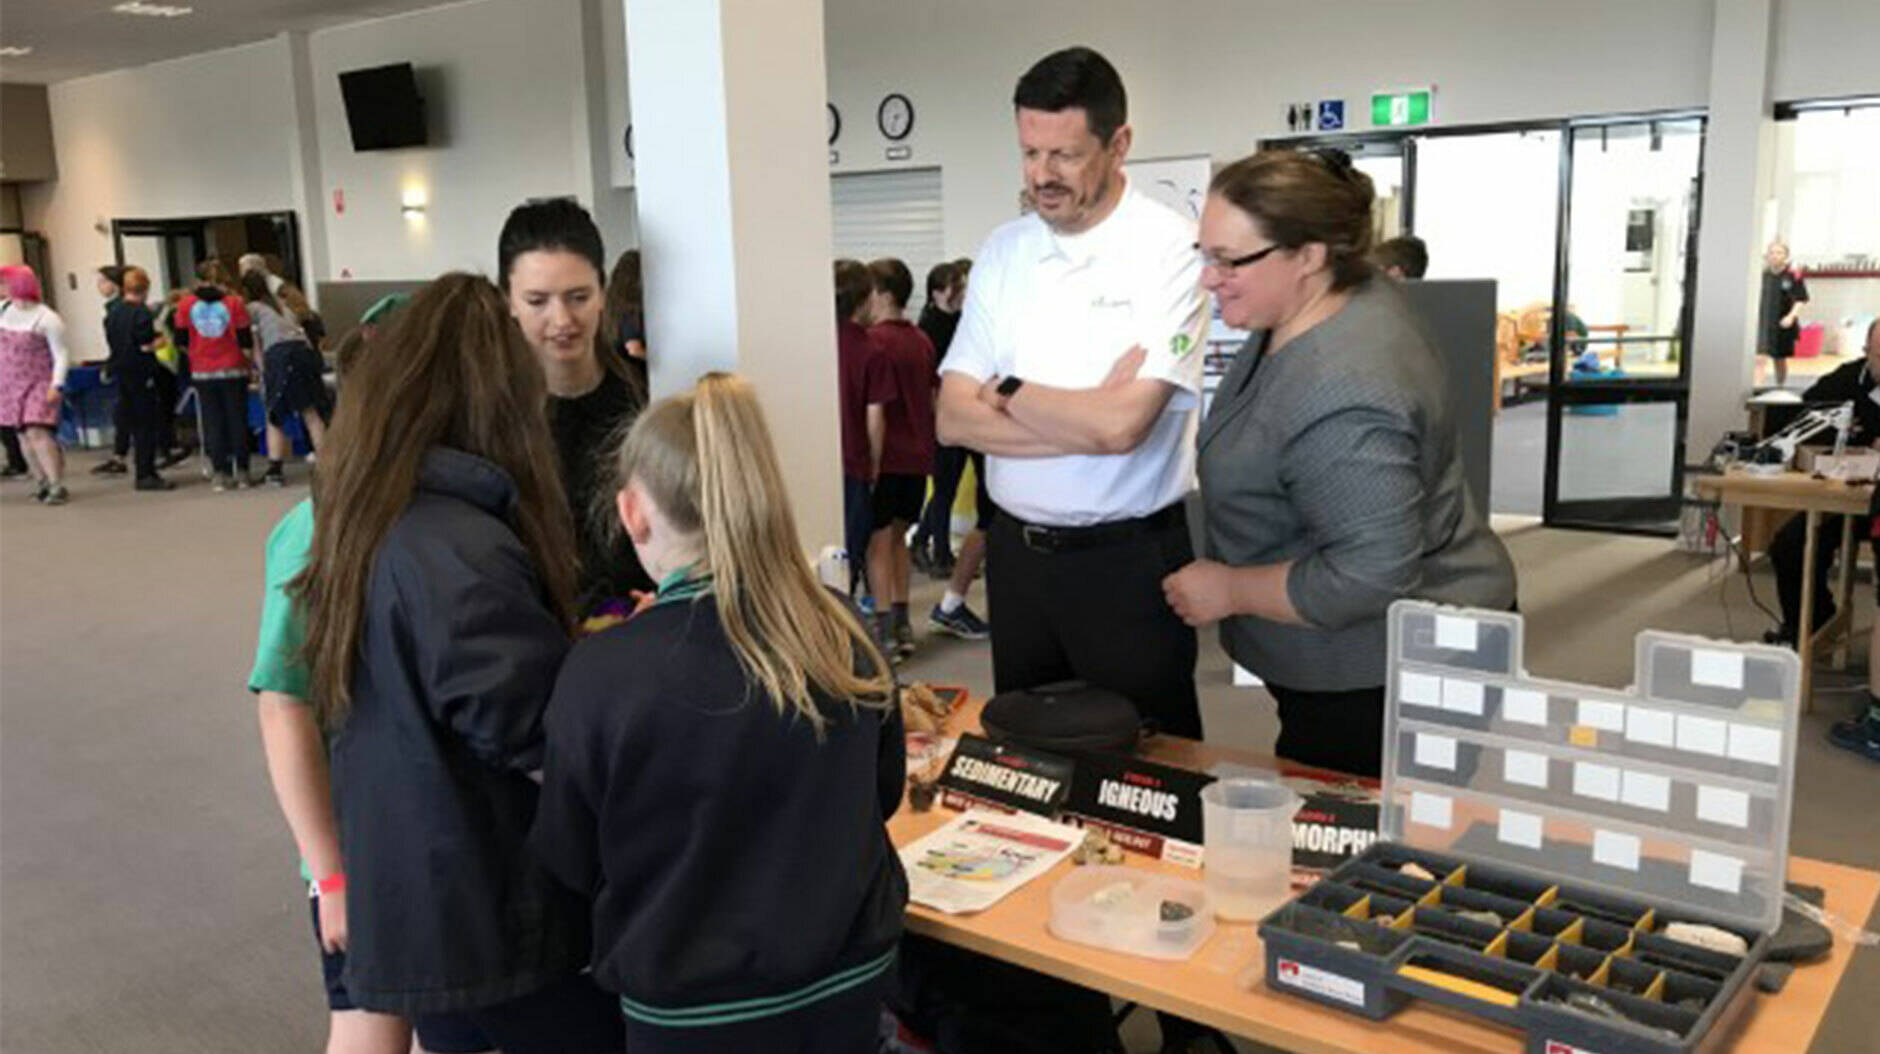 Image Photo — Esso's Chris Russell and Long Island Point Plant Manager Kim Hahn share their passion for science with school students.